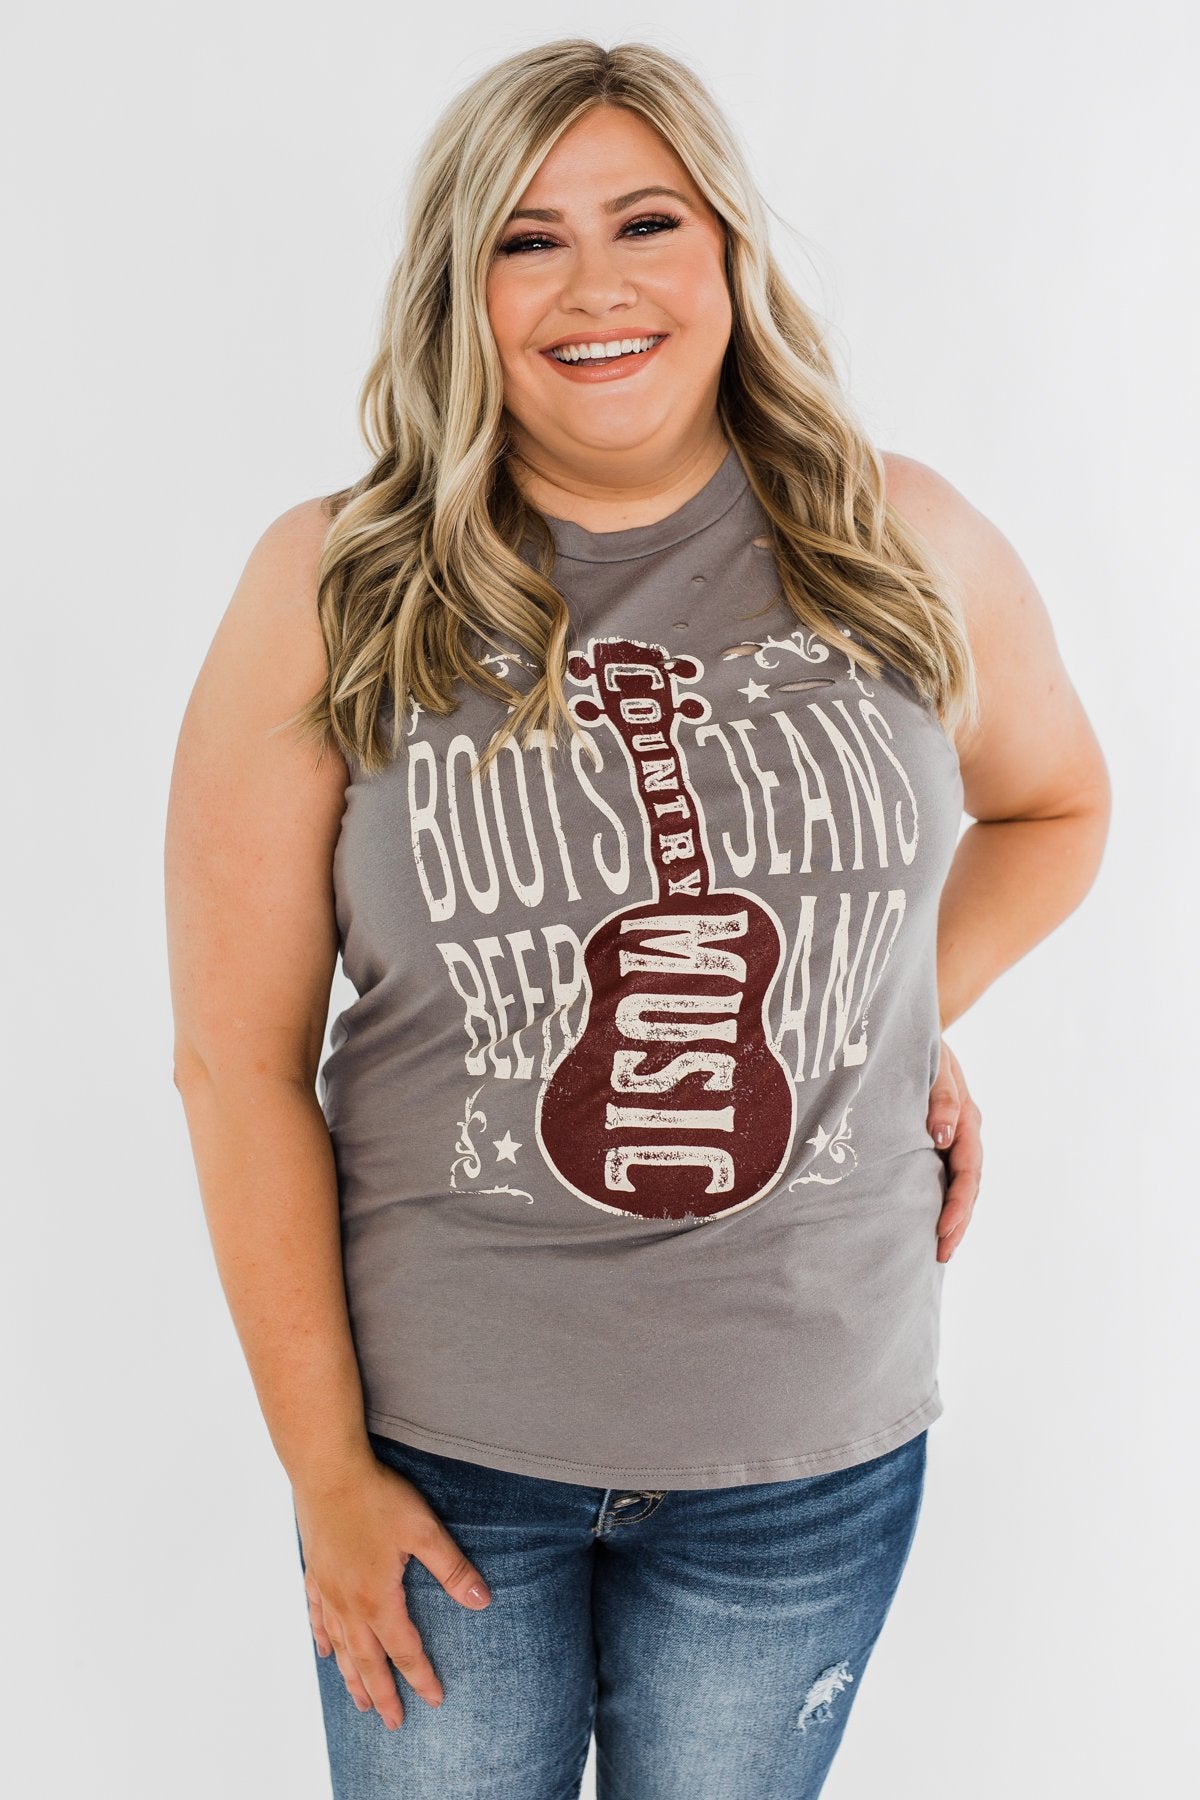 "Boots, Jeans, Beer, & Country Music" Graphic Tank Top- Charcoal